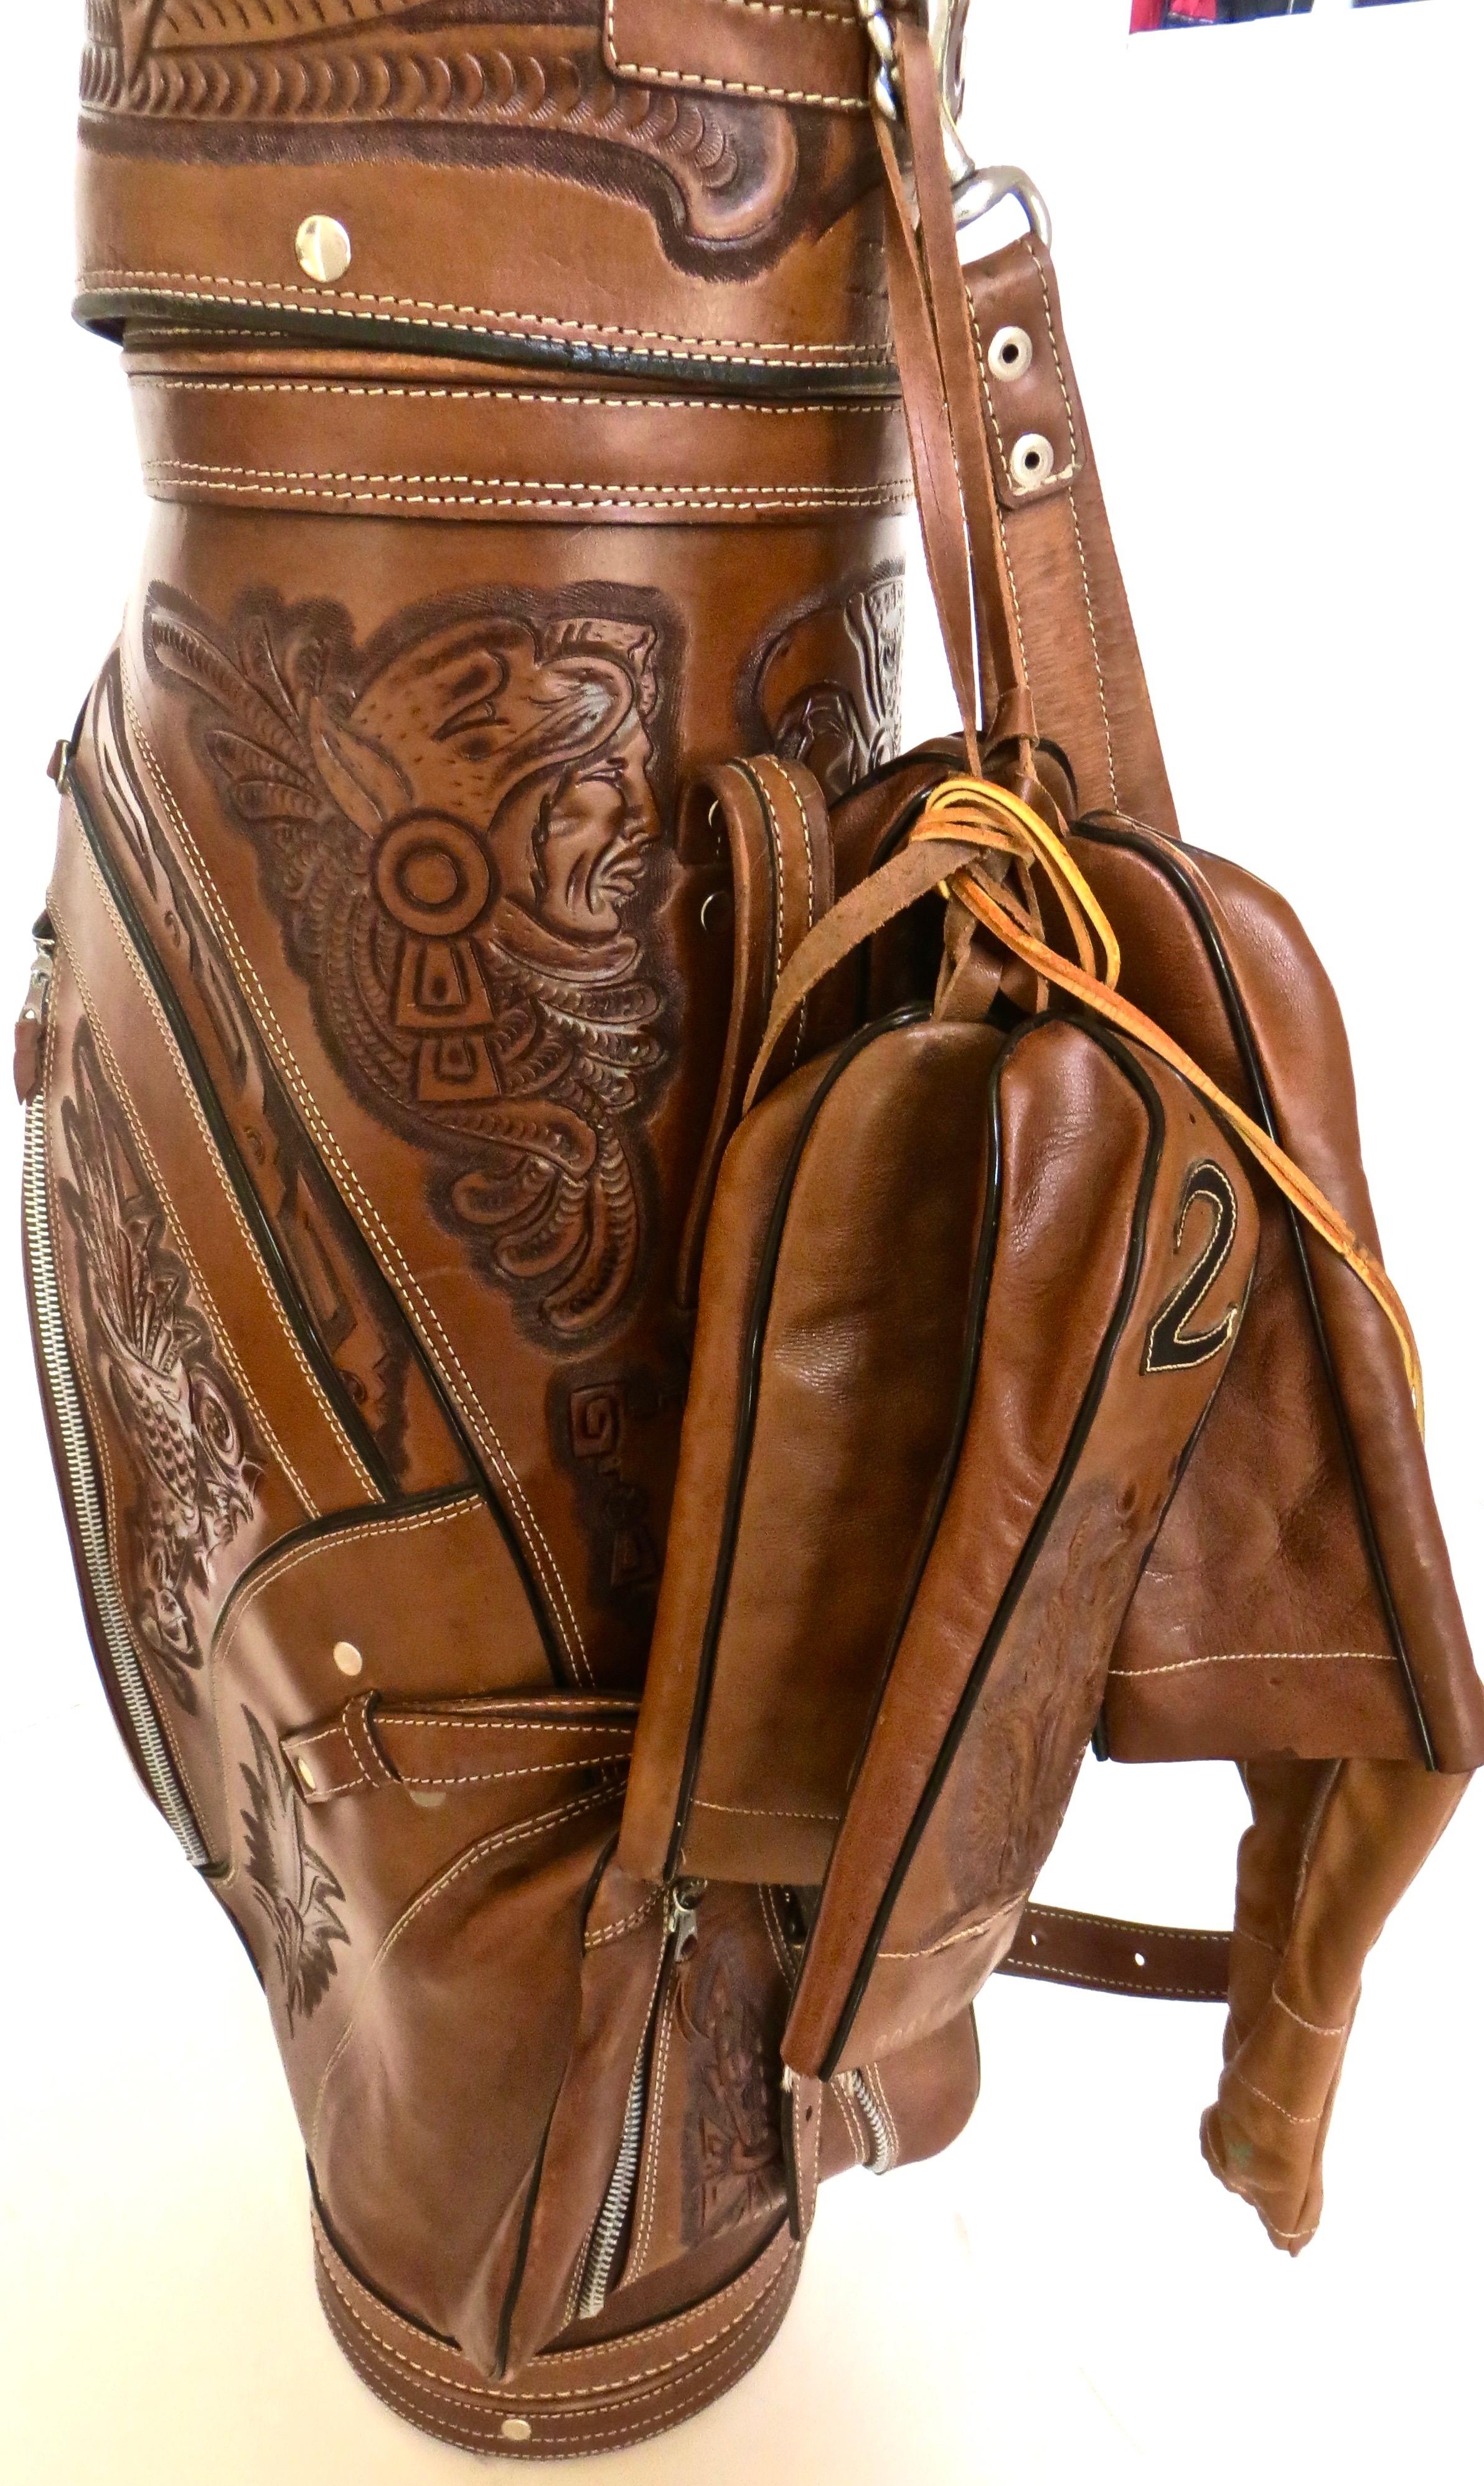 Unique Custom Made Handcrafted Designer Golf Bag in Western Motif, circa 1955 In Excellent Condition For Sale In Incline Village, NV